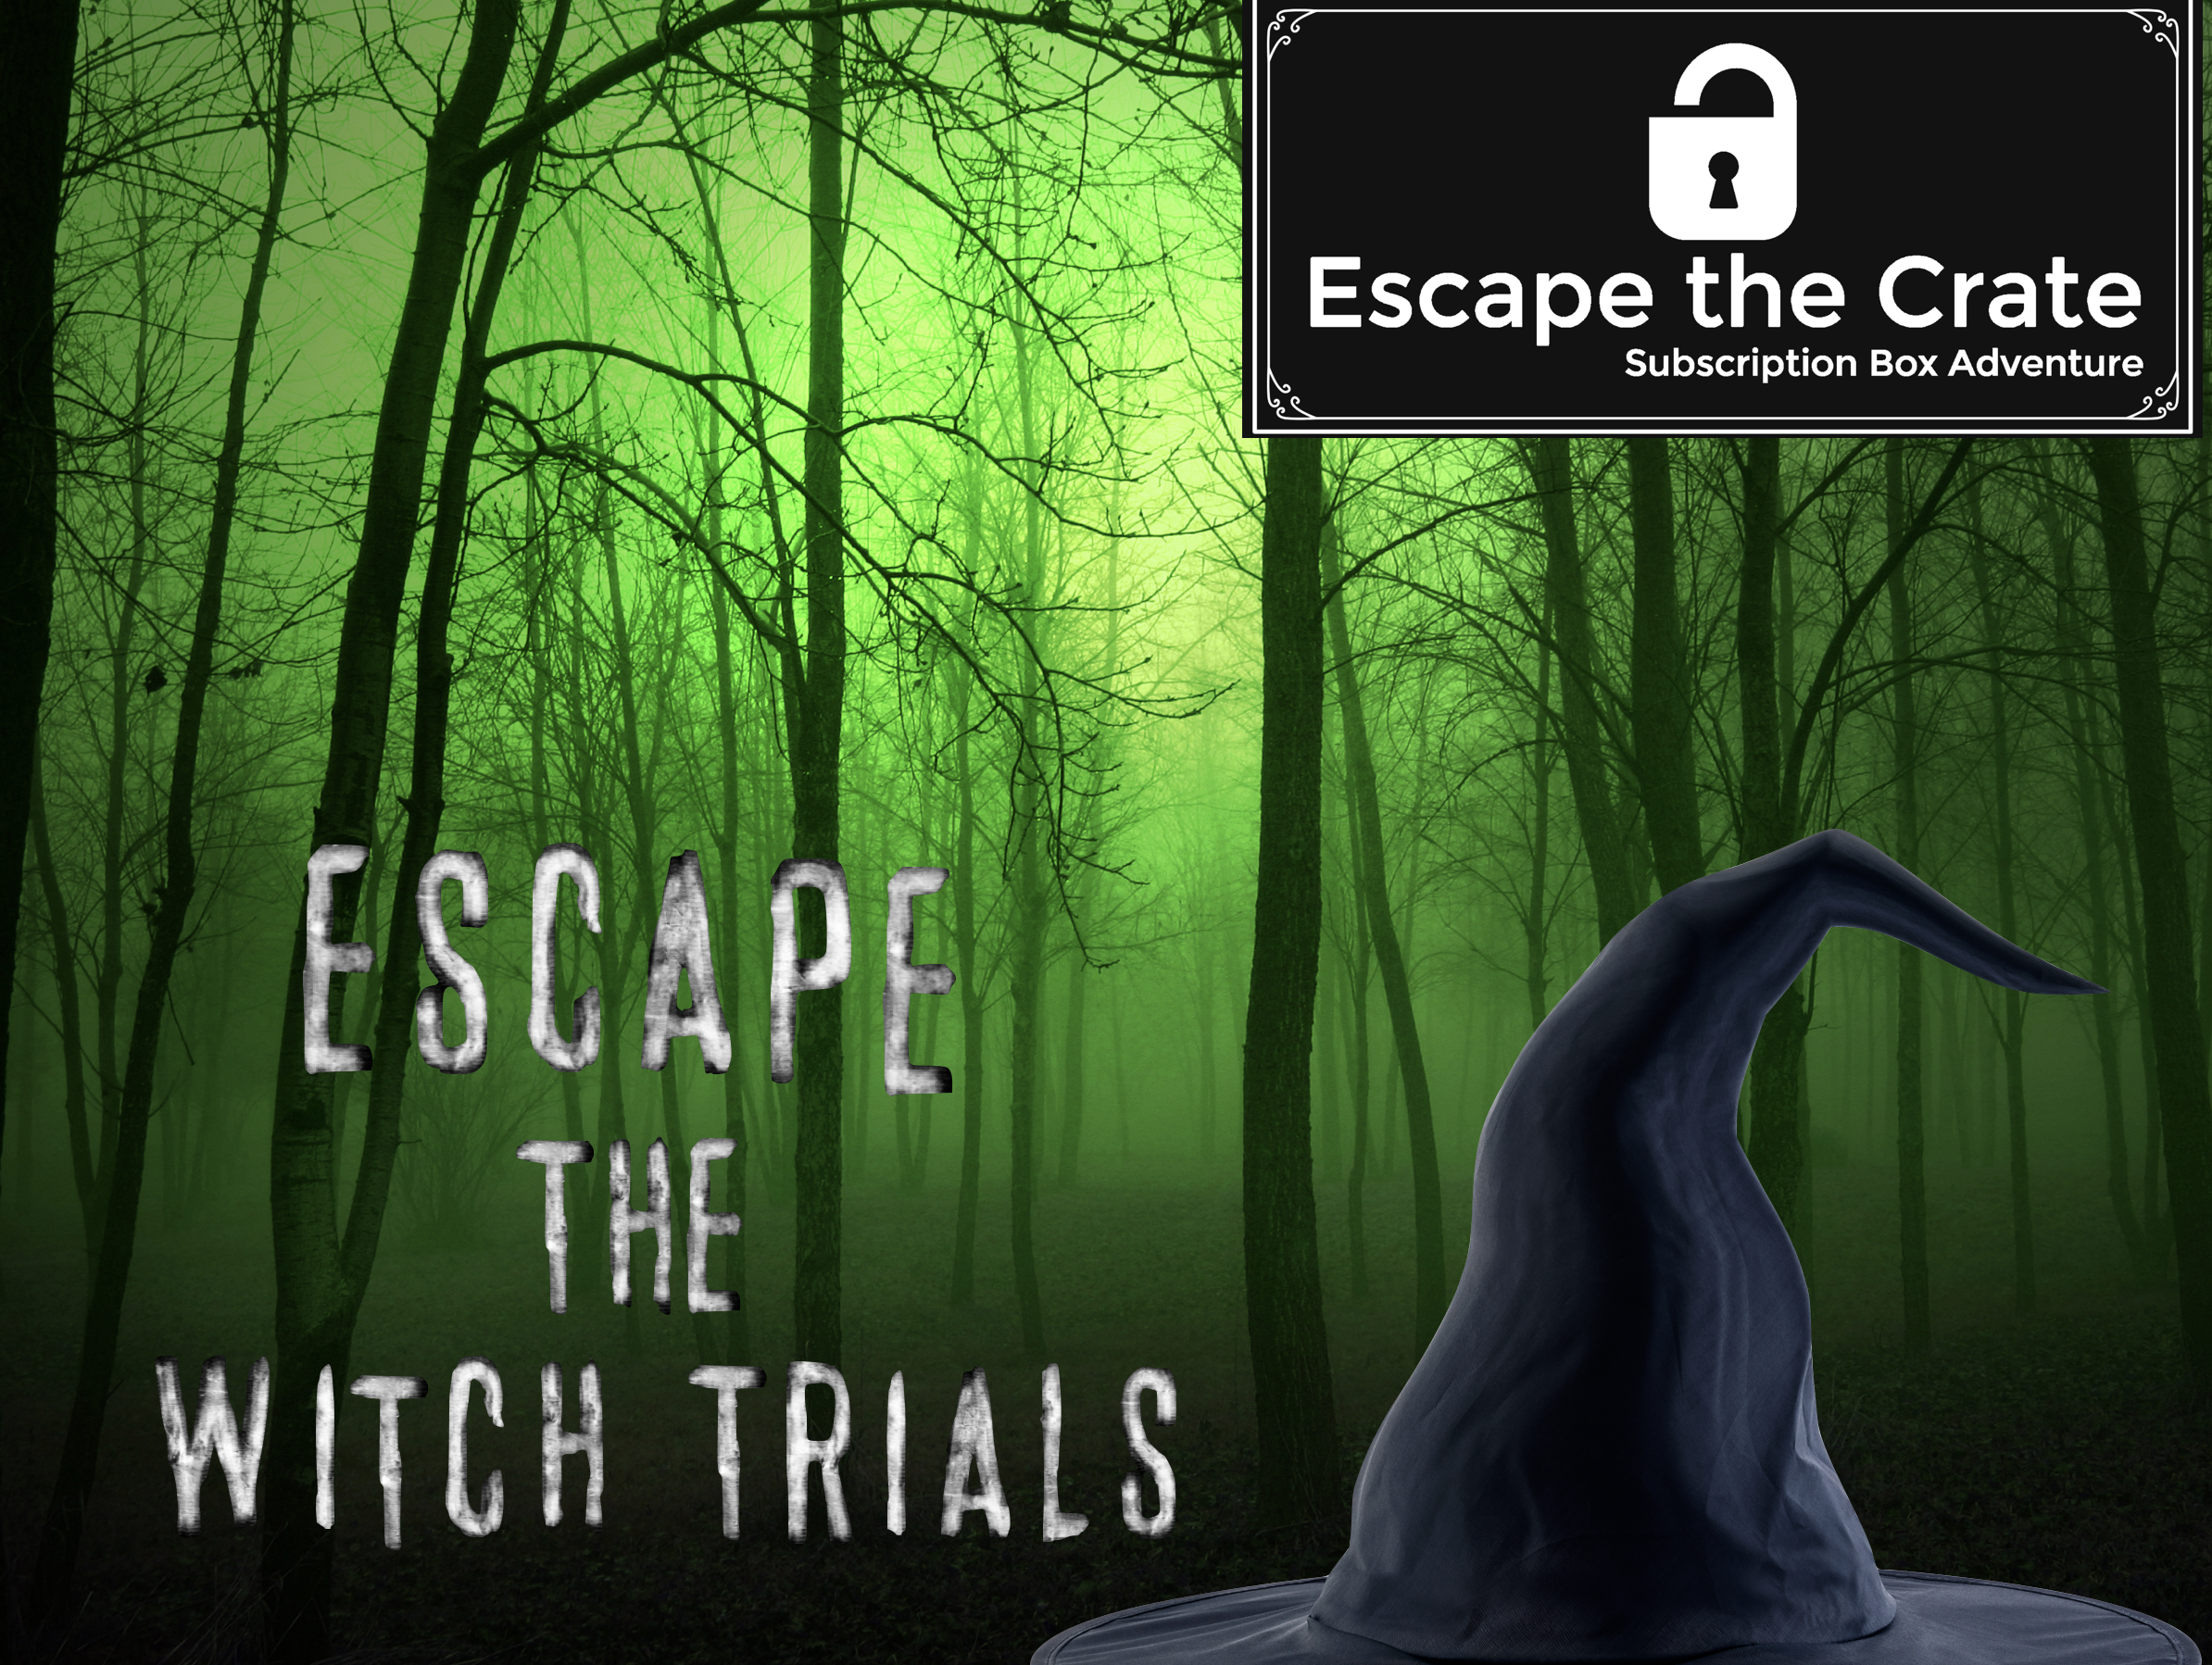 Game 41 - Escape the Witch Trials